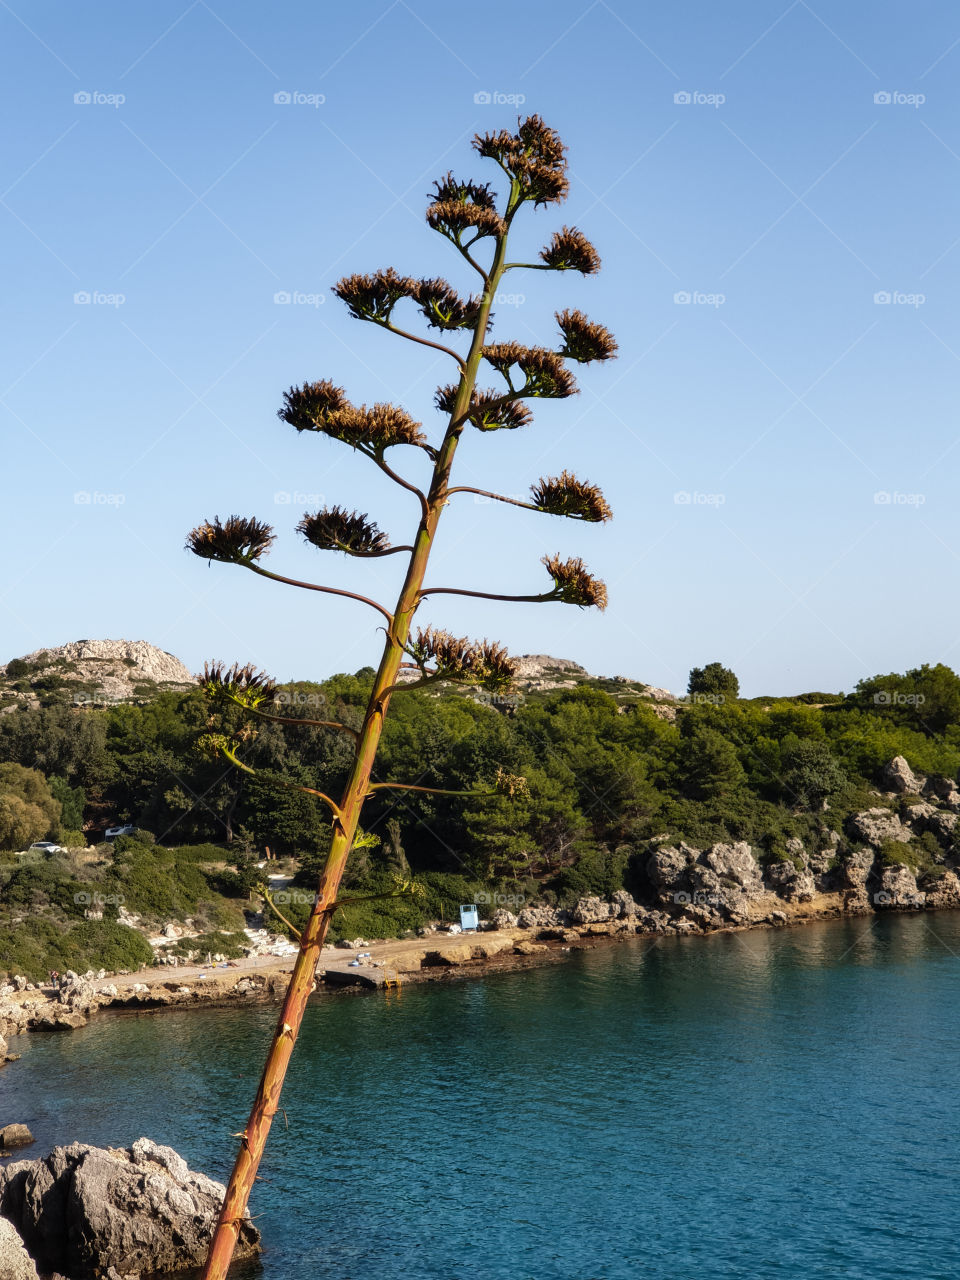 Agave Americana Tree in Anthony Quinn Bay